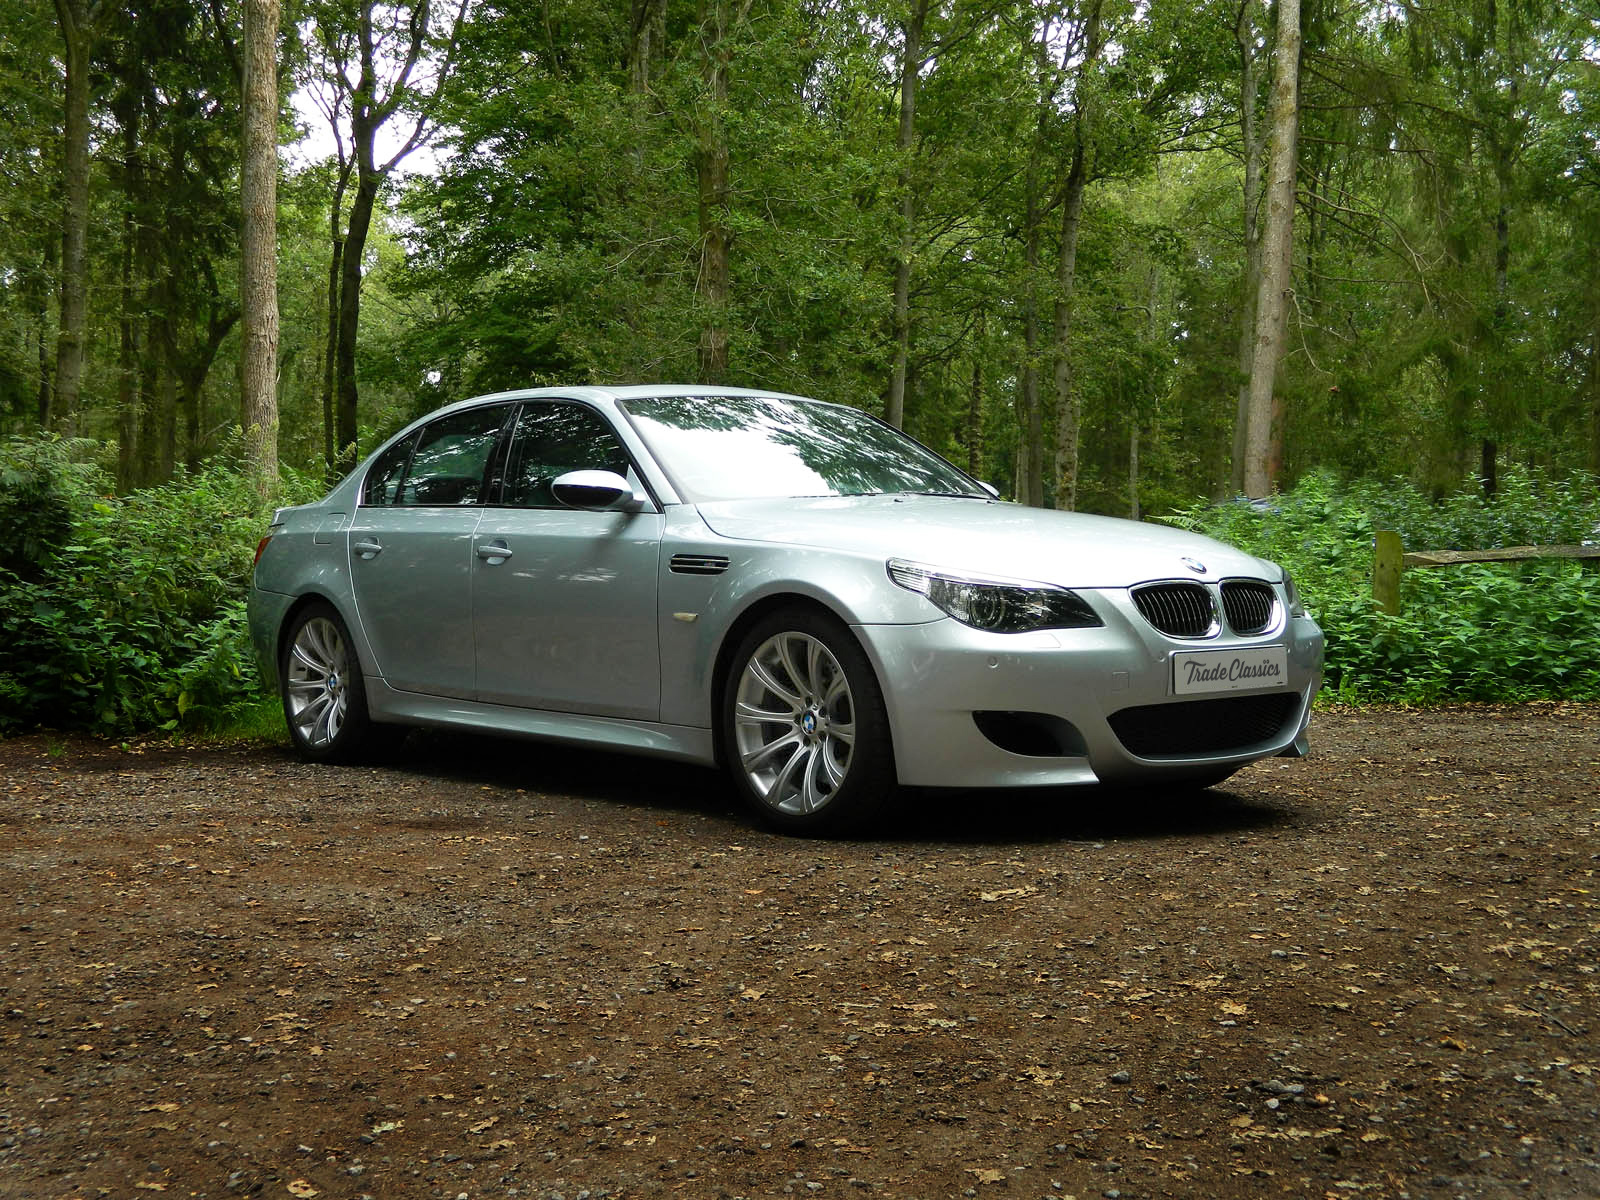 2005 BMW M5 (E60) - price and specifications